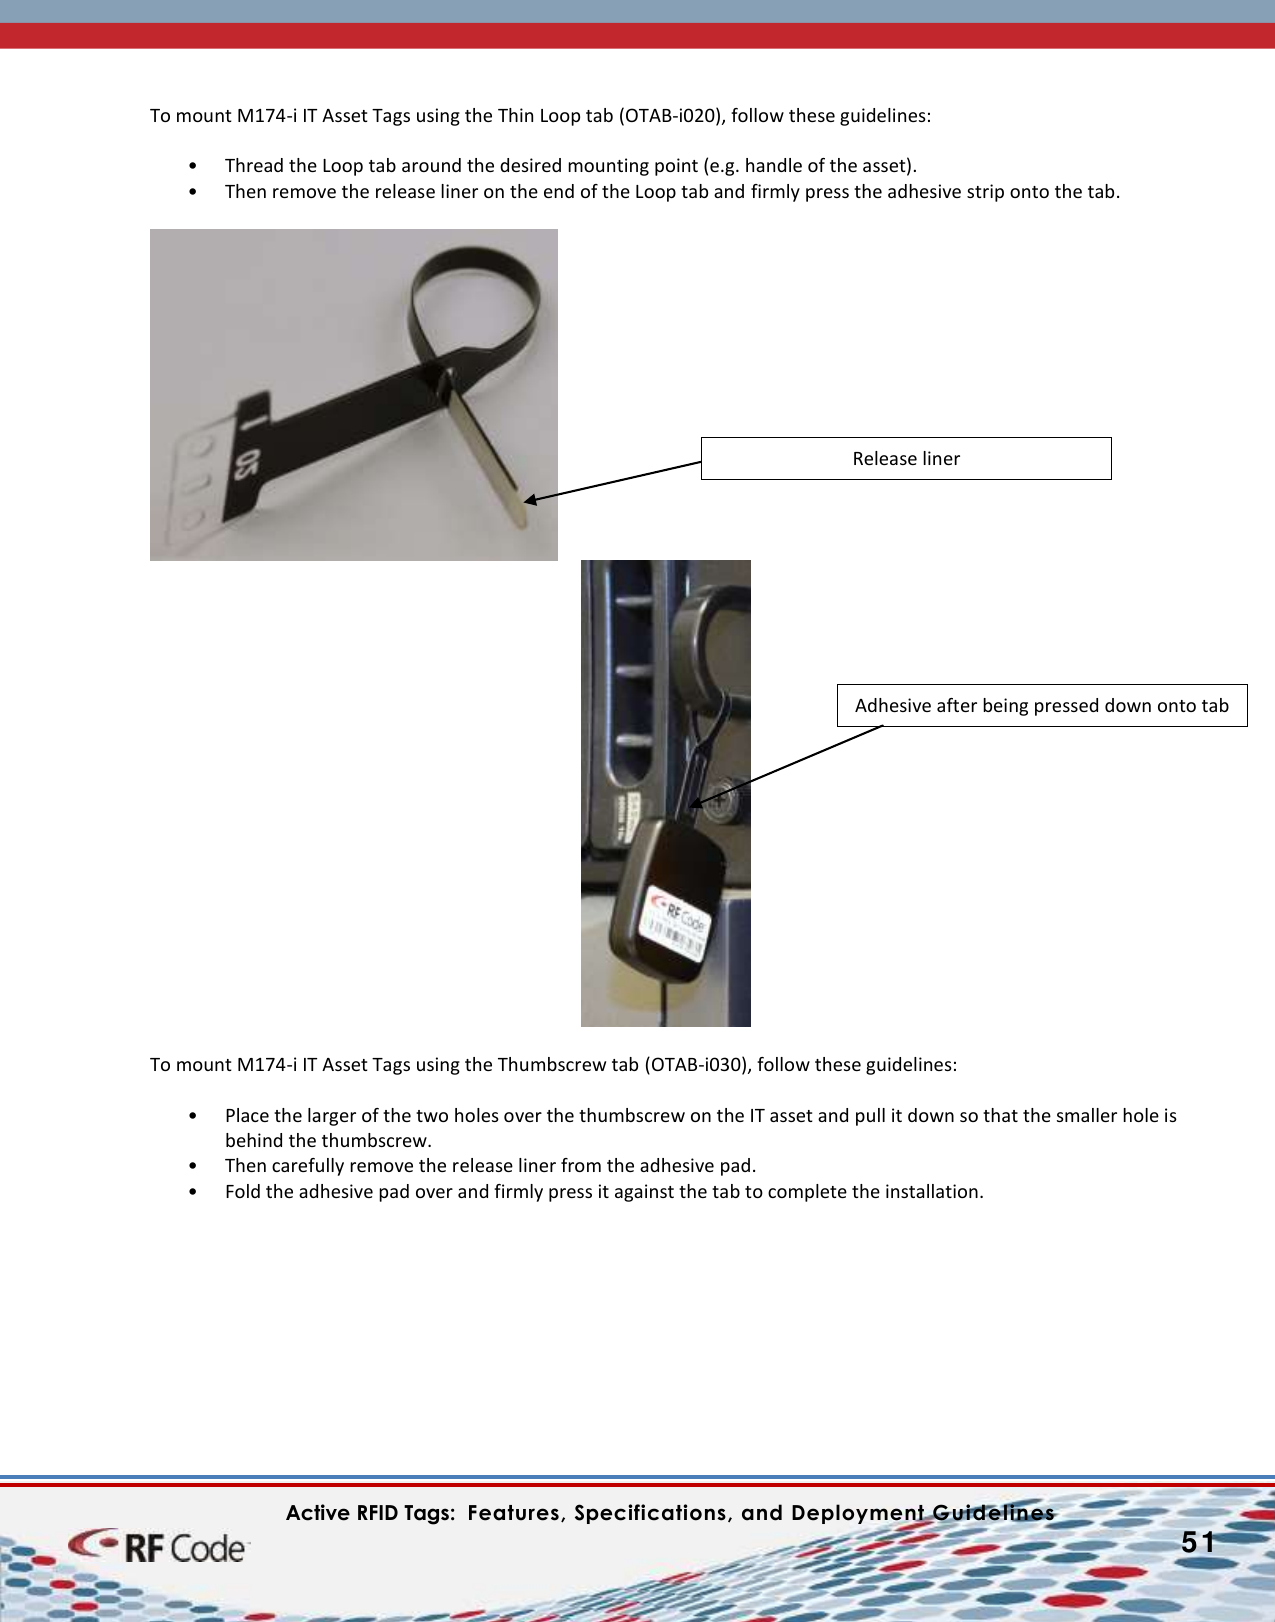    Active RFID Tags:  Features, Specifications, and Deployment Guidelines           51        To mount M174-i IT Asset Tags using the Thin Loop tab (OTAB-i020), follow these guidelines:  • Thread the Loop tab around the desired mounting point (e.g. handle of the asset).  • Then remove the release liner on the end of the Loop tab and firmly press the adhesive strip onto the tab.     To mount M174-i IT Asset Tags using the Thumbscrew tab (OTAB-i030), follow these guidelines:  • Place the larger of the two holes over the thumbscrew on the IT asset and pull it down so that the smaller hole is behind the thumbscrew. • Then carefully remove the release liner from the adhesive pad. • Fold the adhesive pad over and firmly press it against the tab to complete the installation.  Release liner Adhesive after being pressed down onto tab 